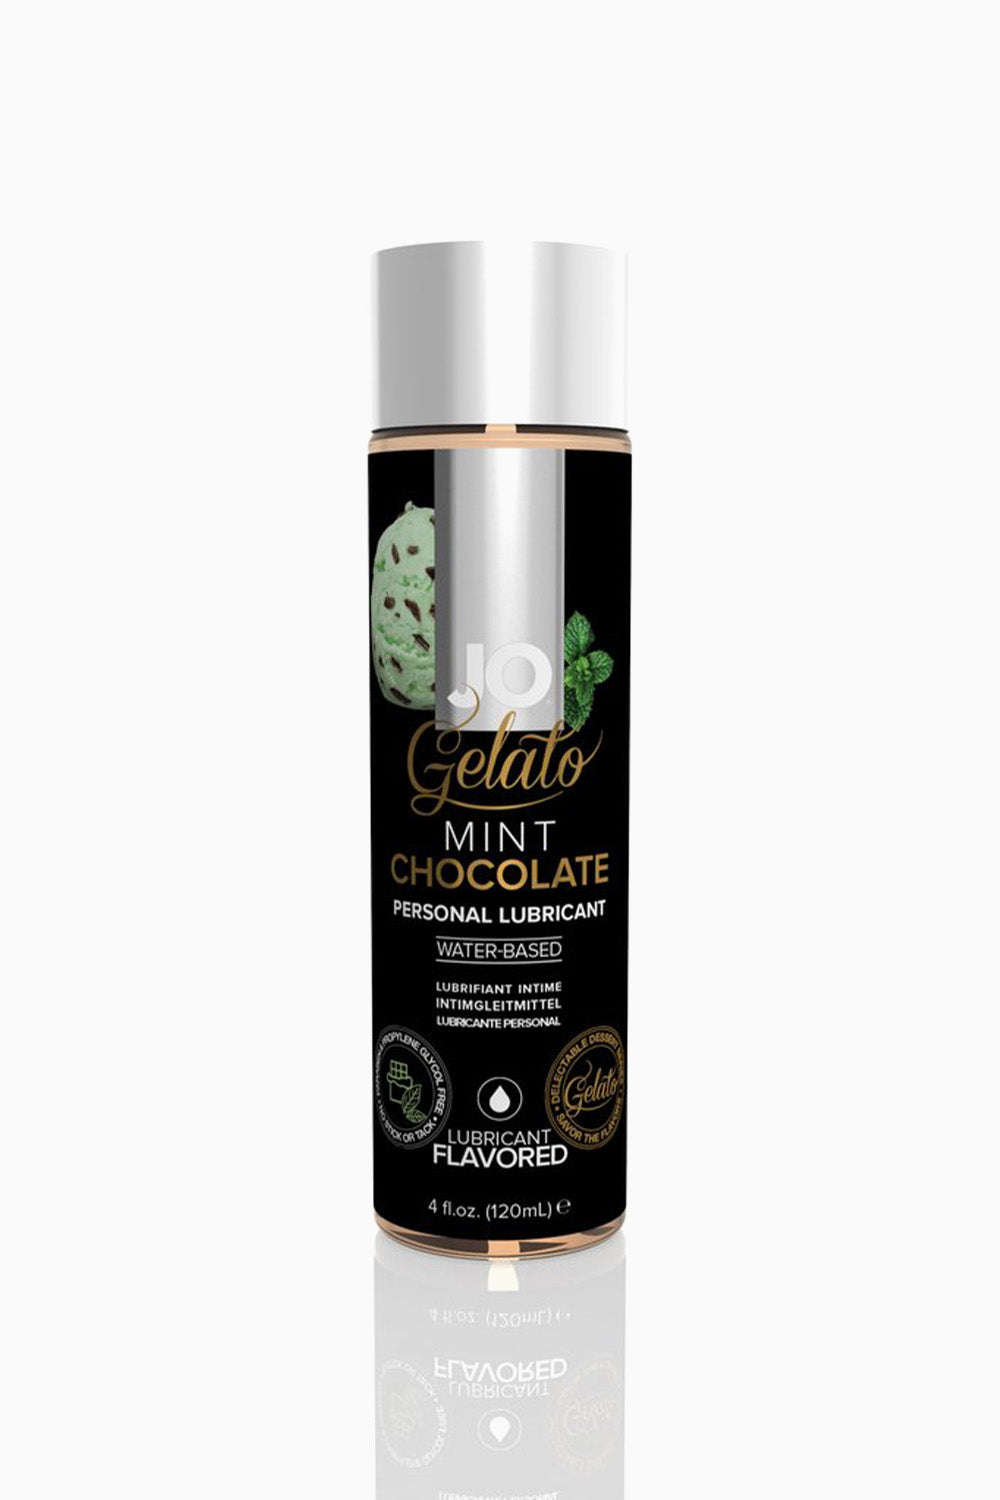 System JO Gelato Mint Chocolate Lubricant Water Based